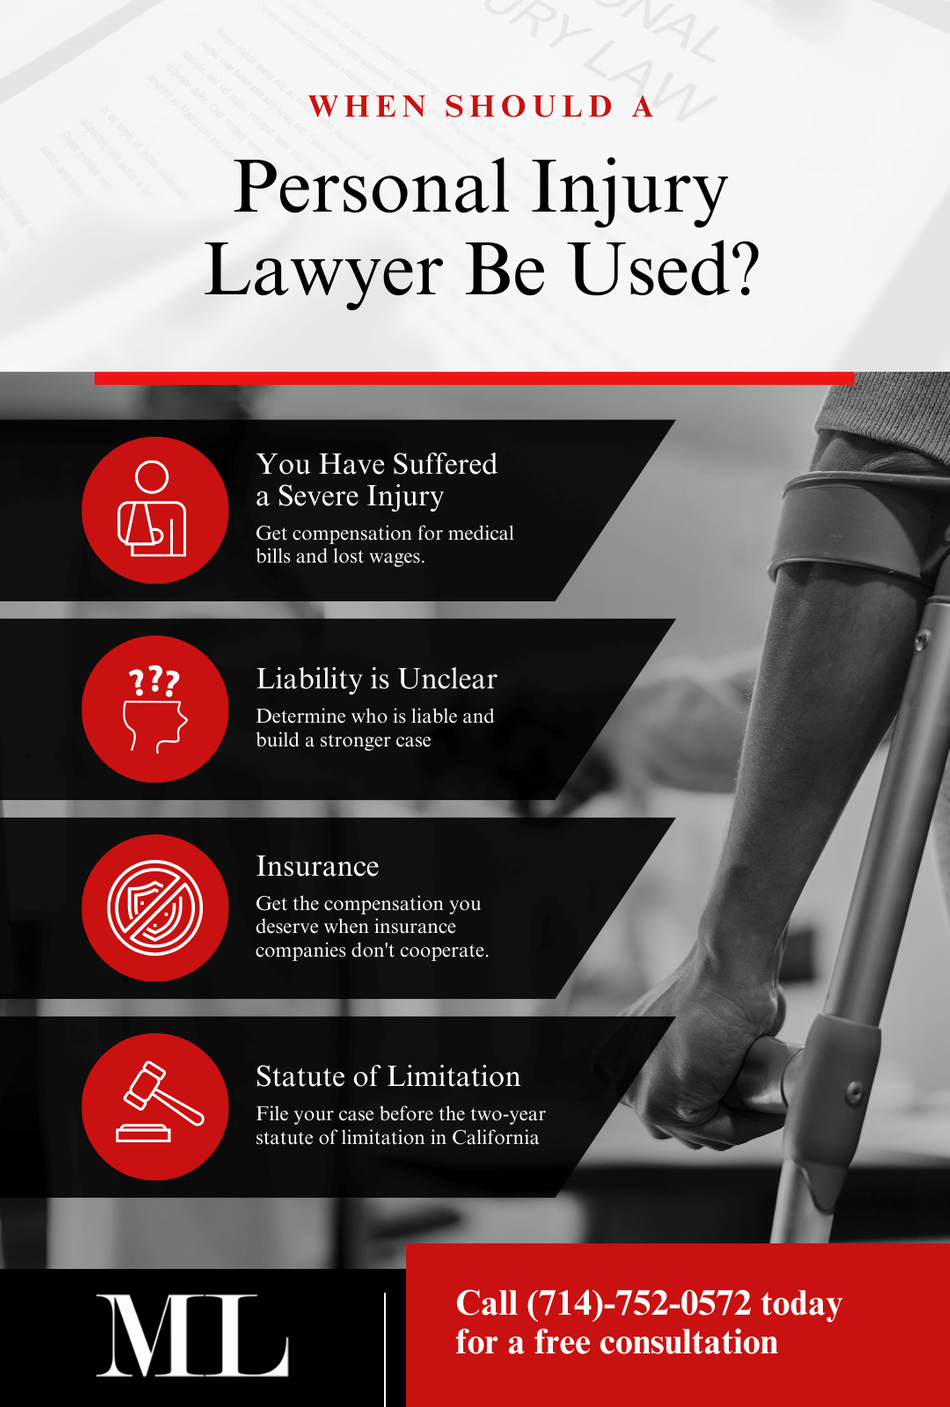 When Should a Personal Injury Lawyer Be Used? Infographic